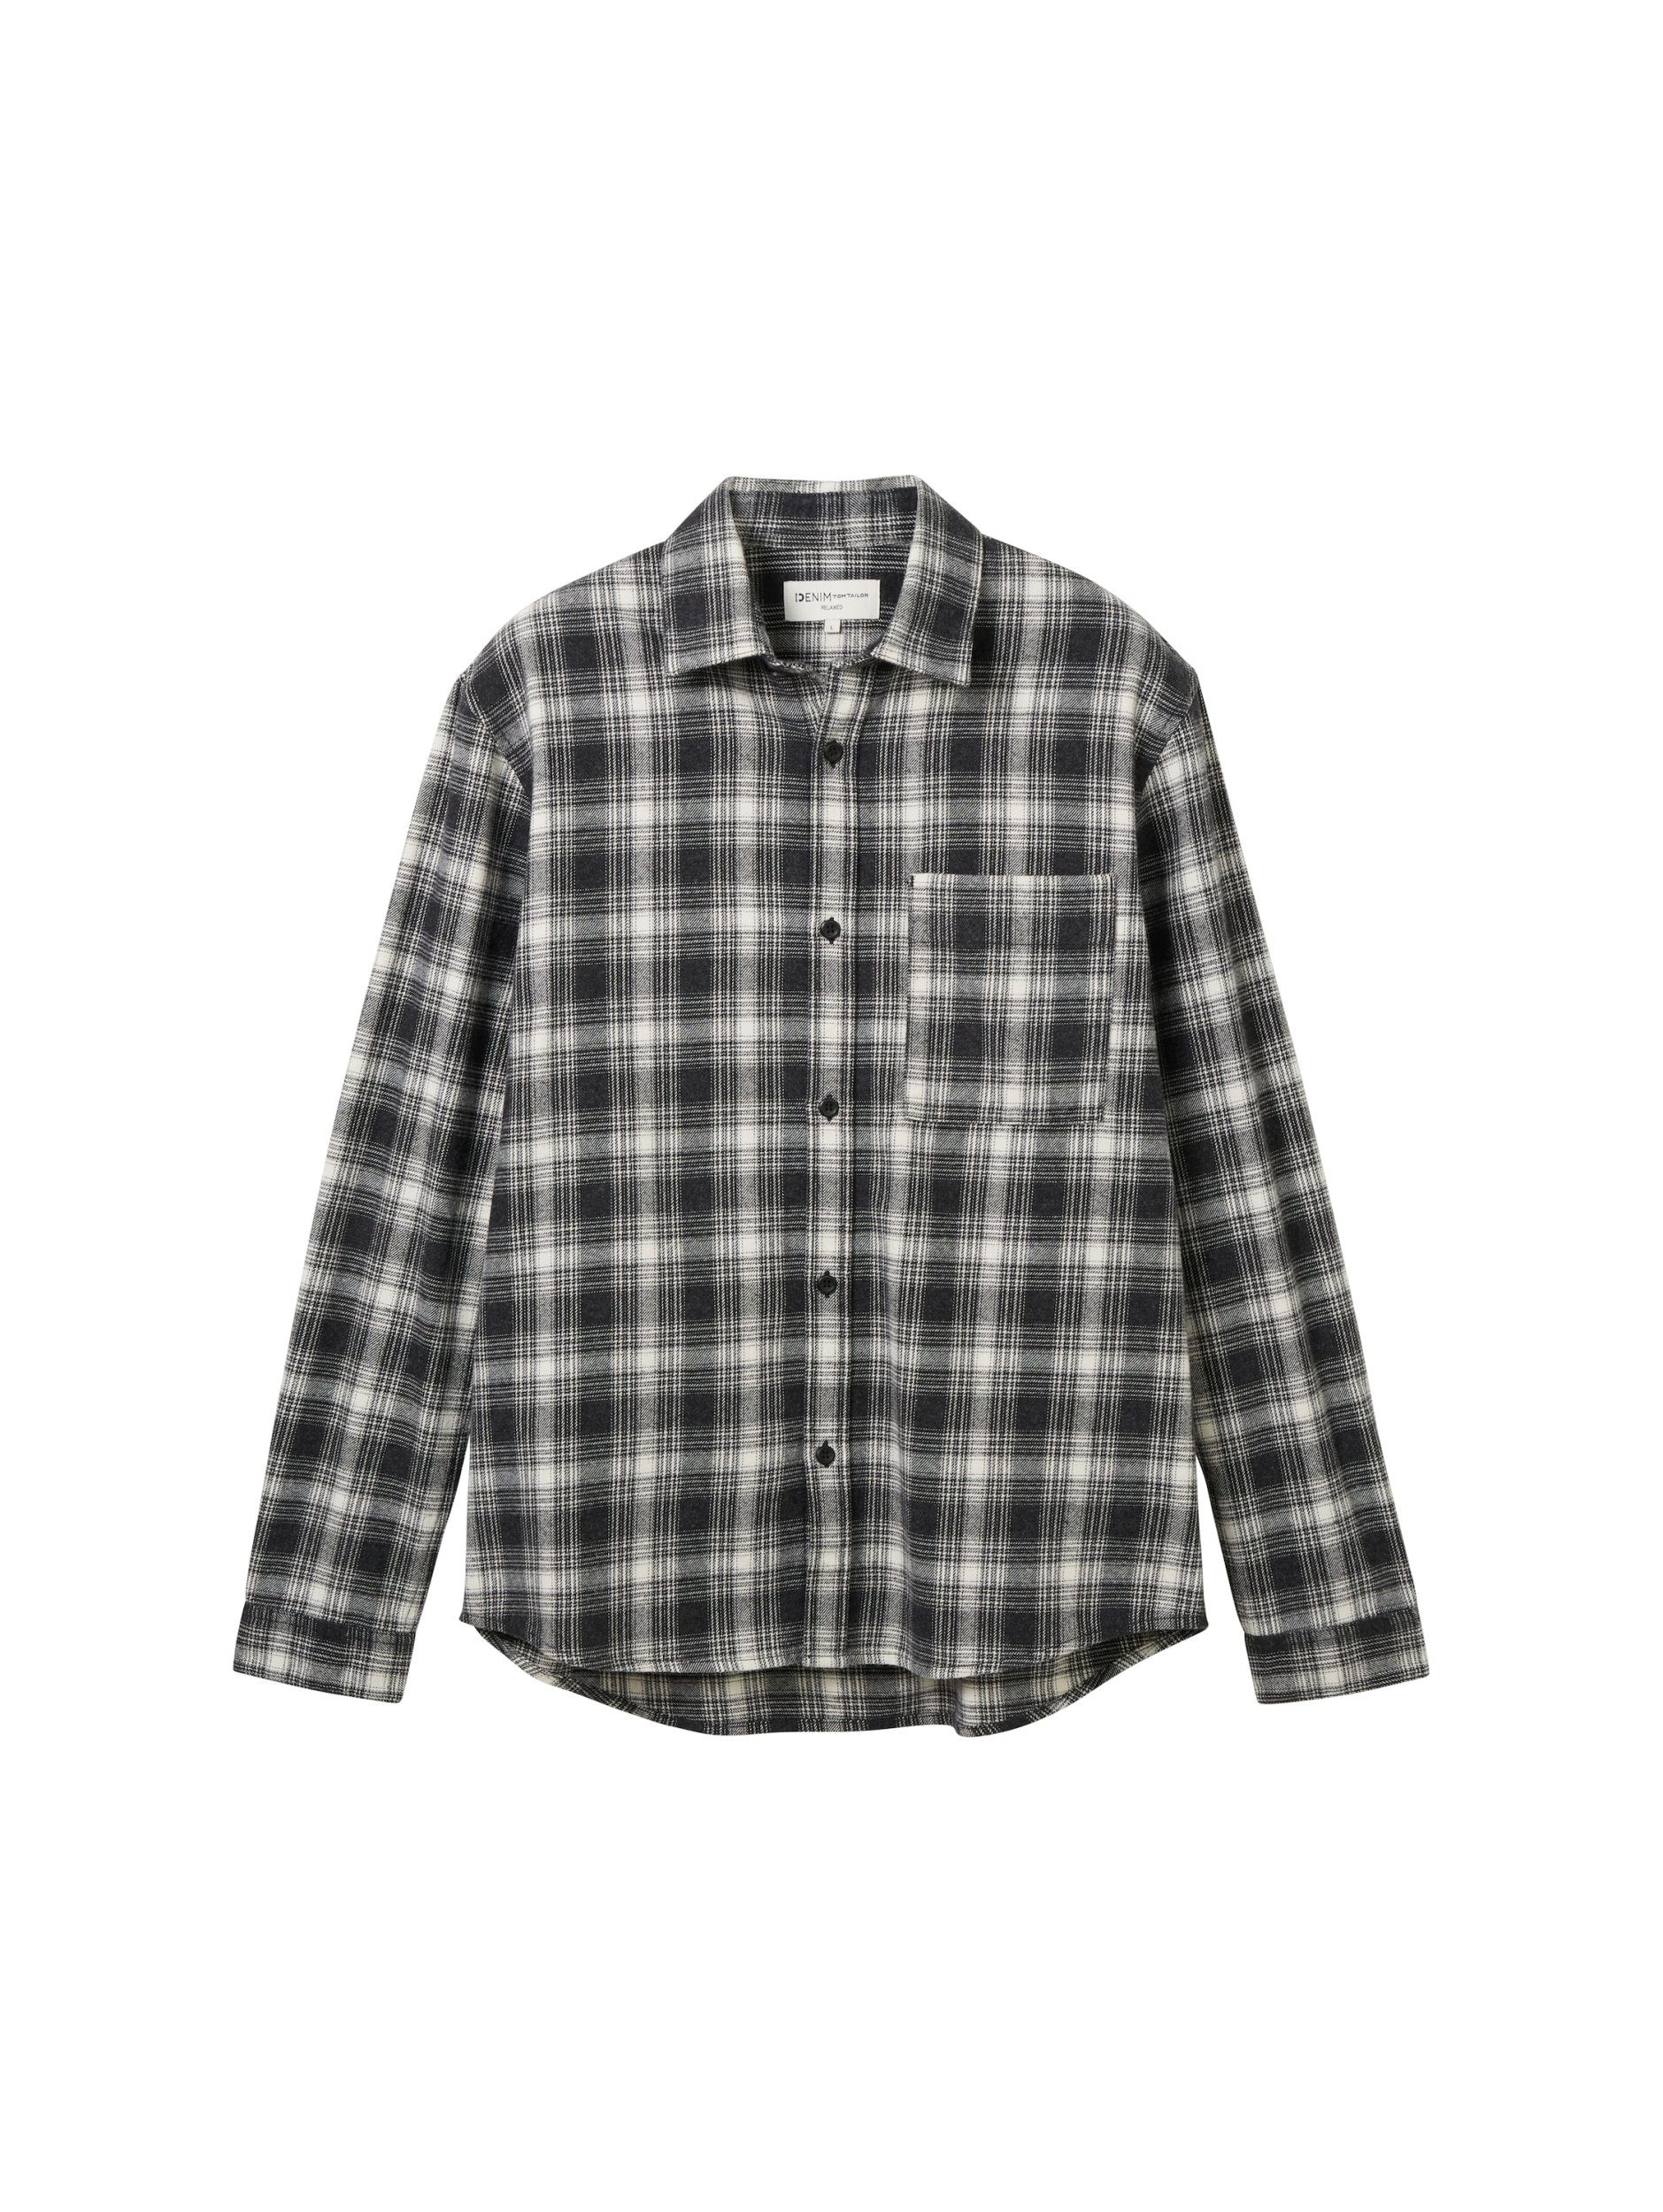 TOM TAILOR Denim Langarmhemd relaxed checked twill shirt